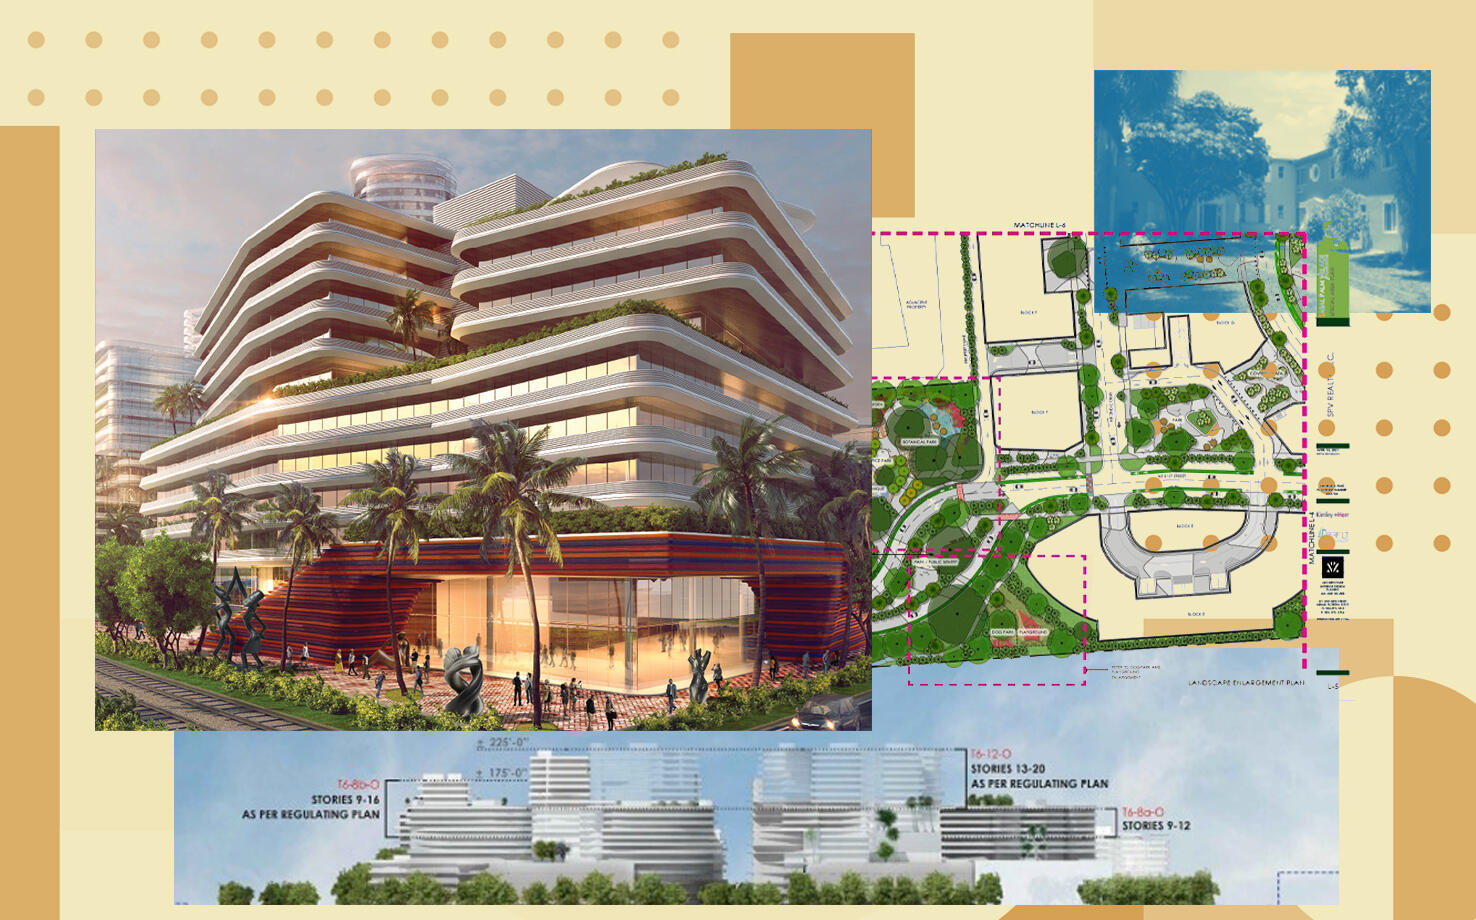 The development team of Sabal Palm Village aims to replace low-rise Design Place with a high-rise community with public spaces and bike paths. (Images provided by SPV Realty LC)